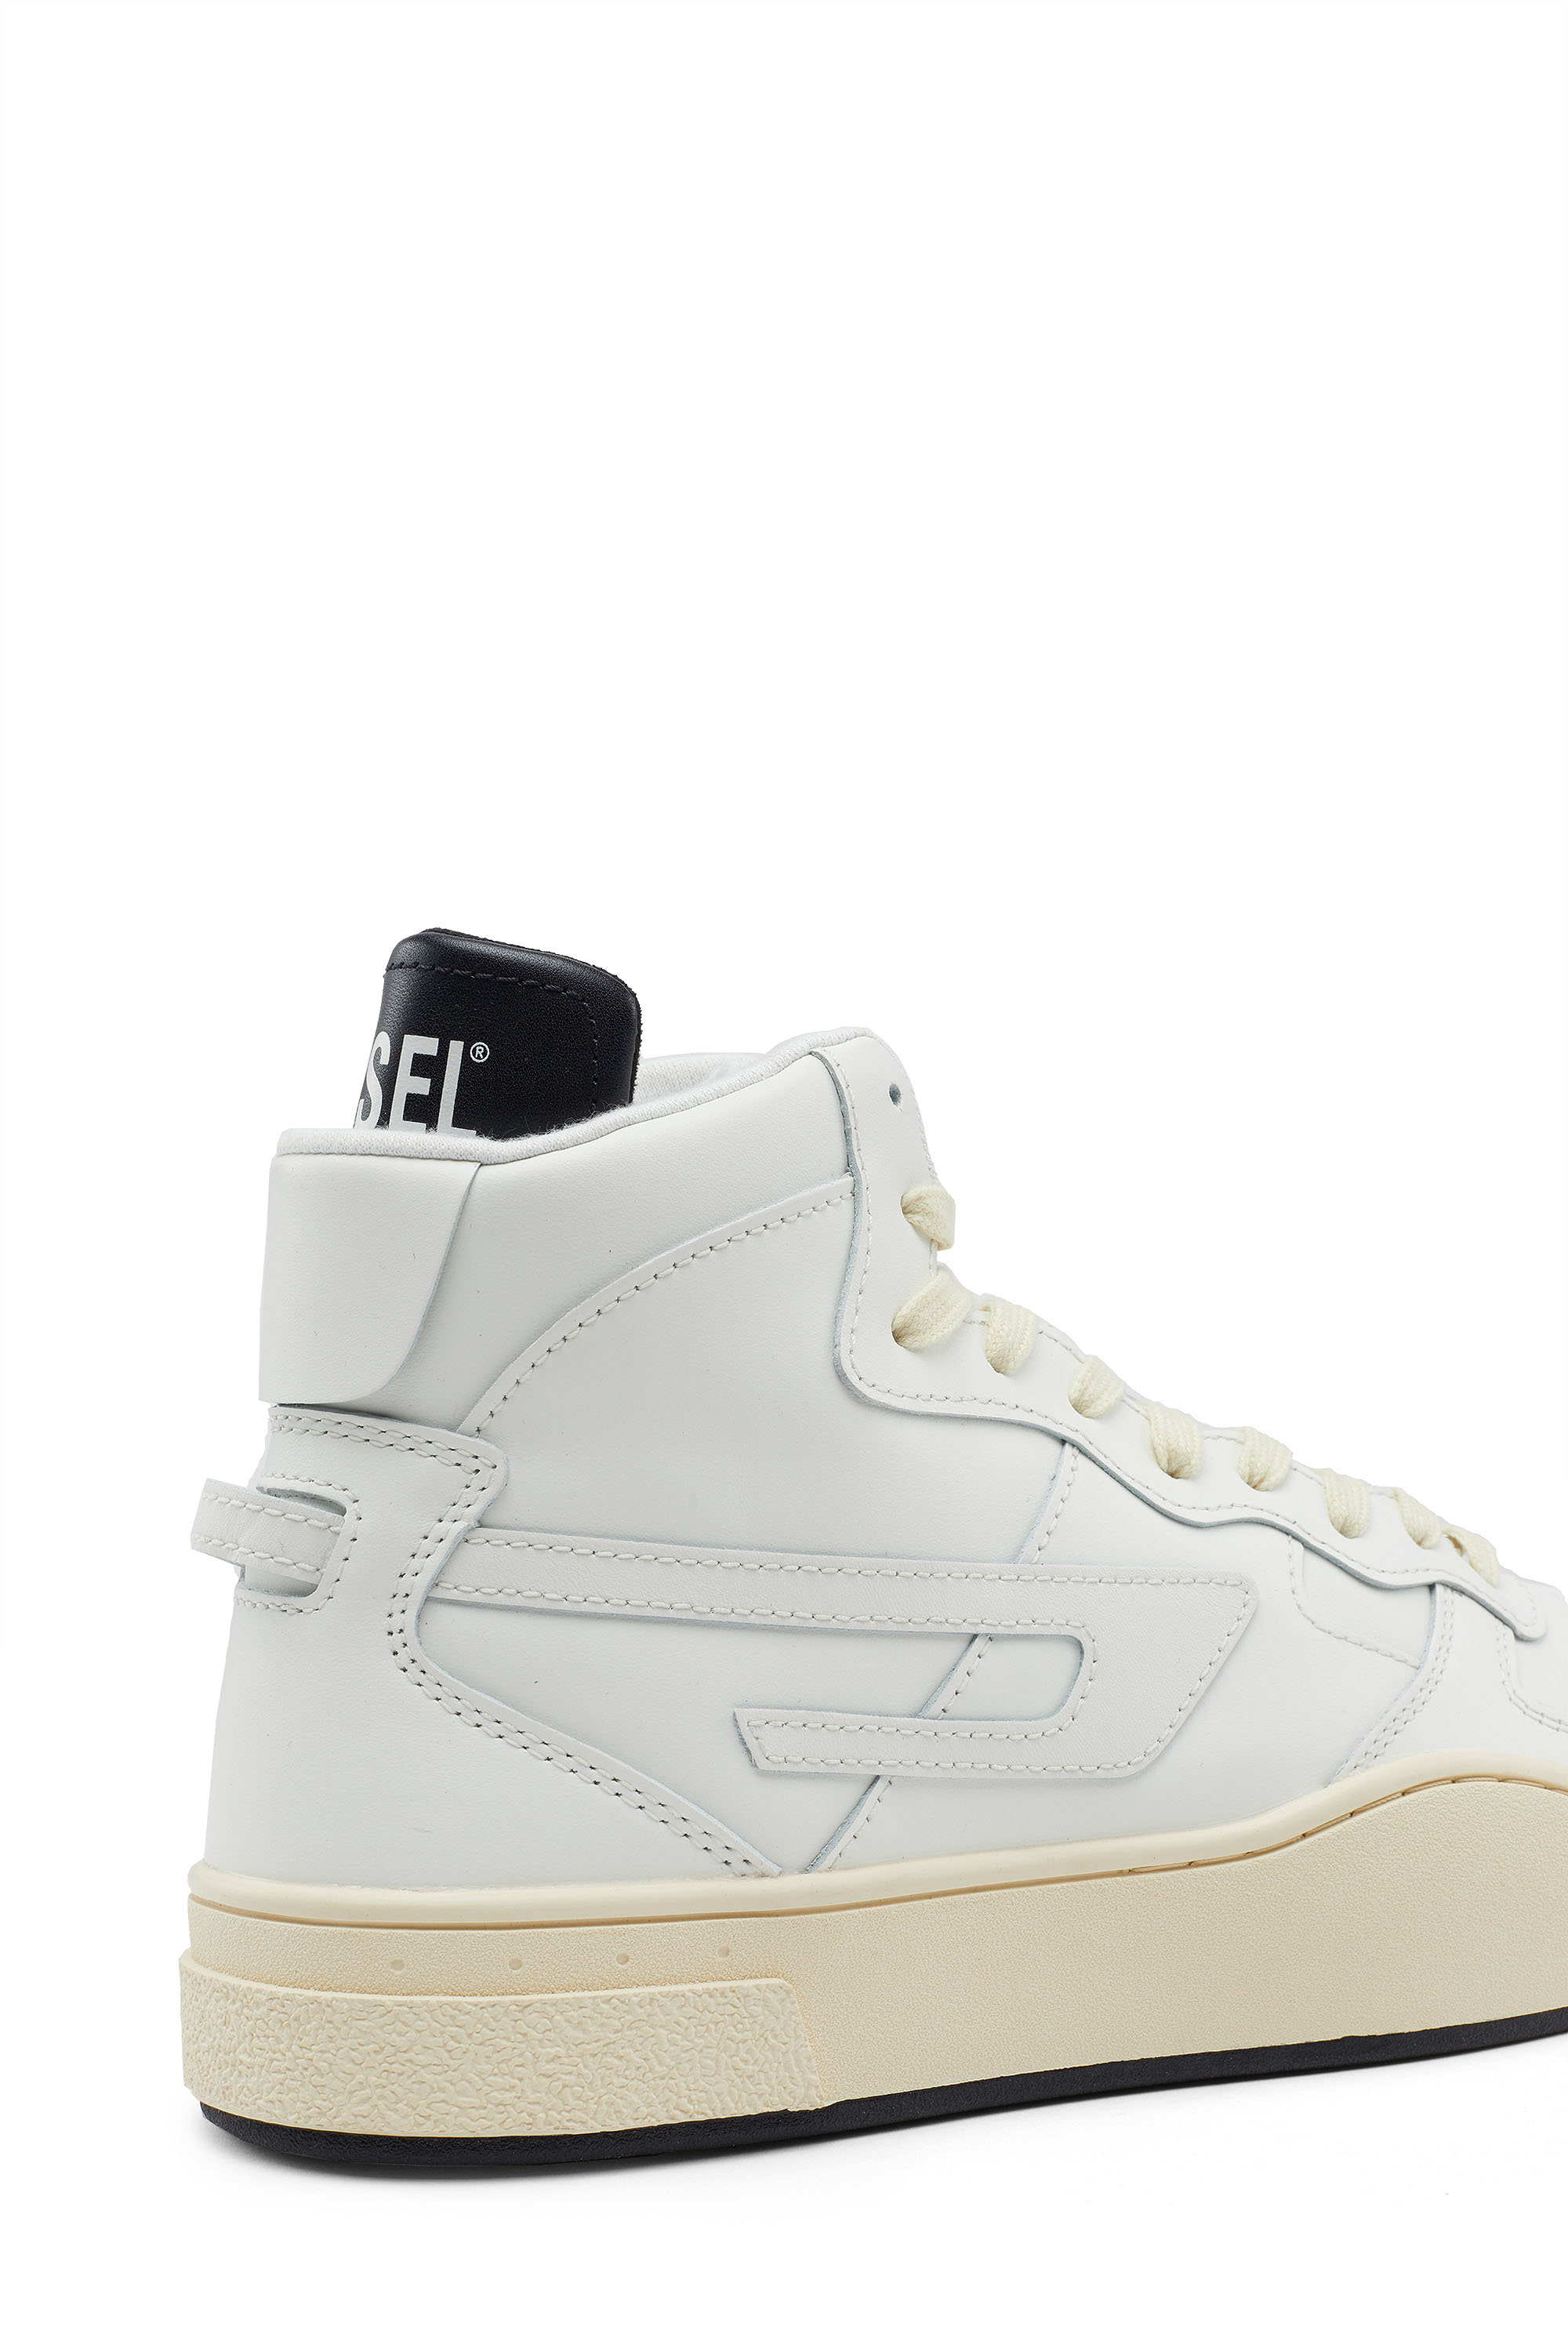 S-UKIYO MID Man: Leather high-top sneakers with D logo | Diesel